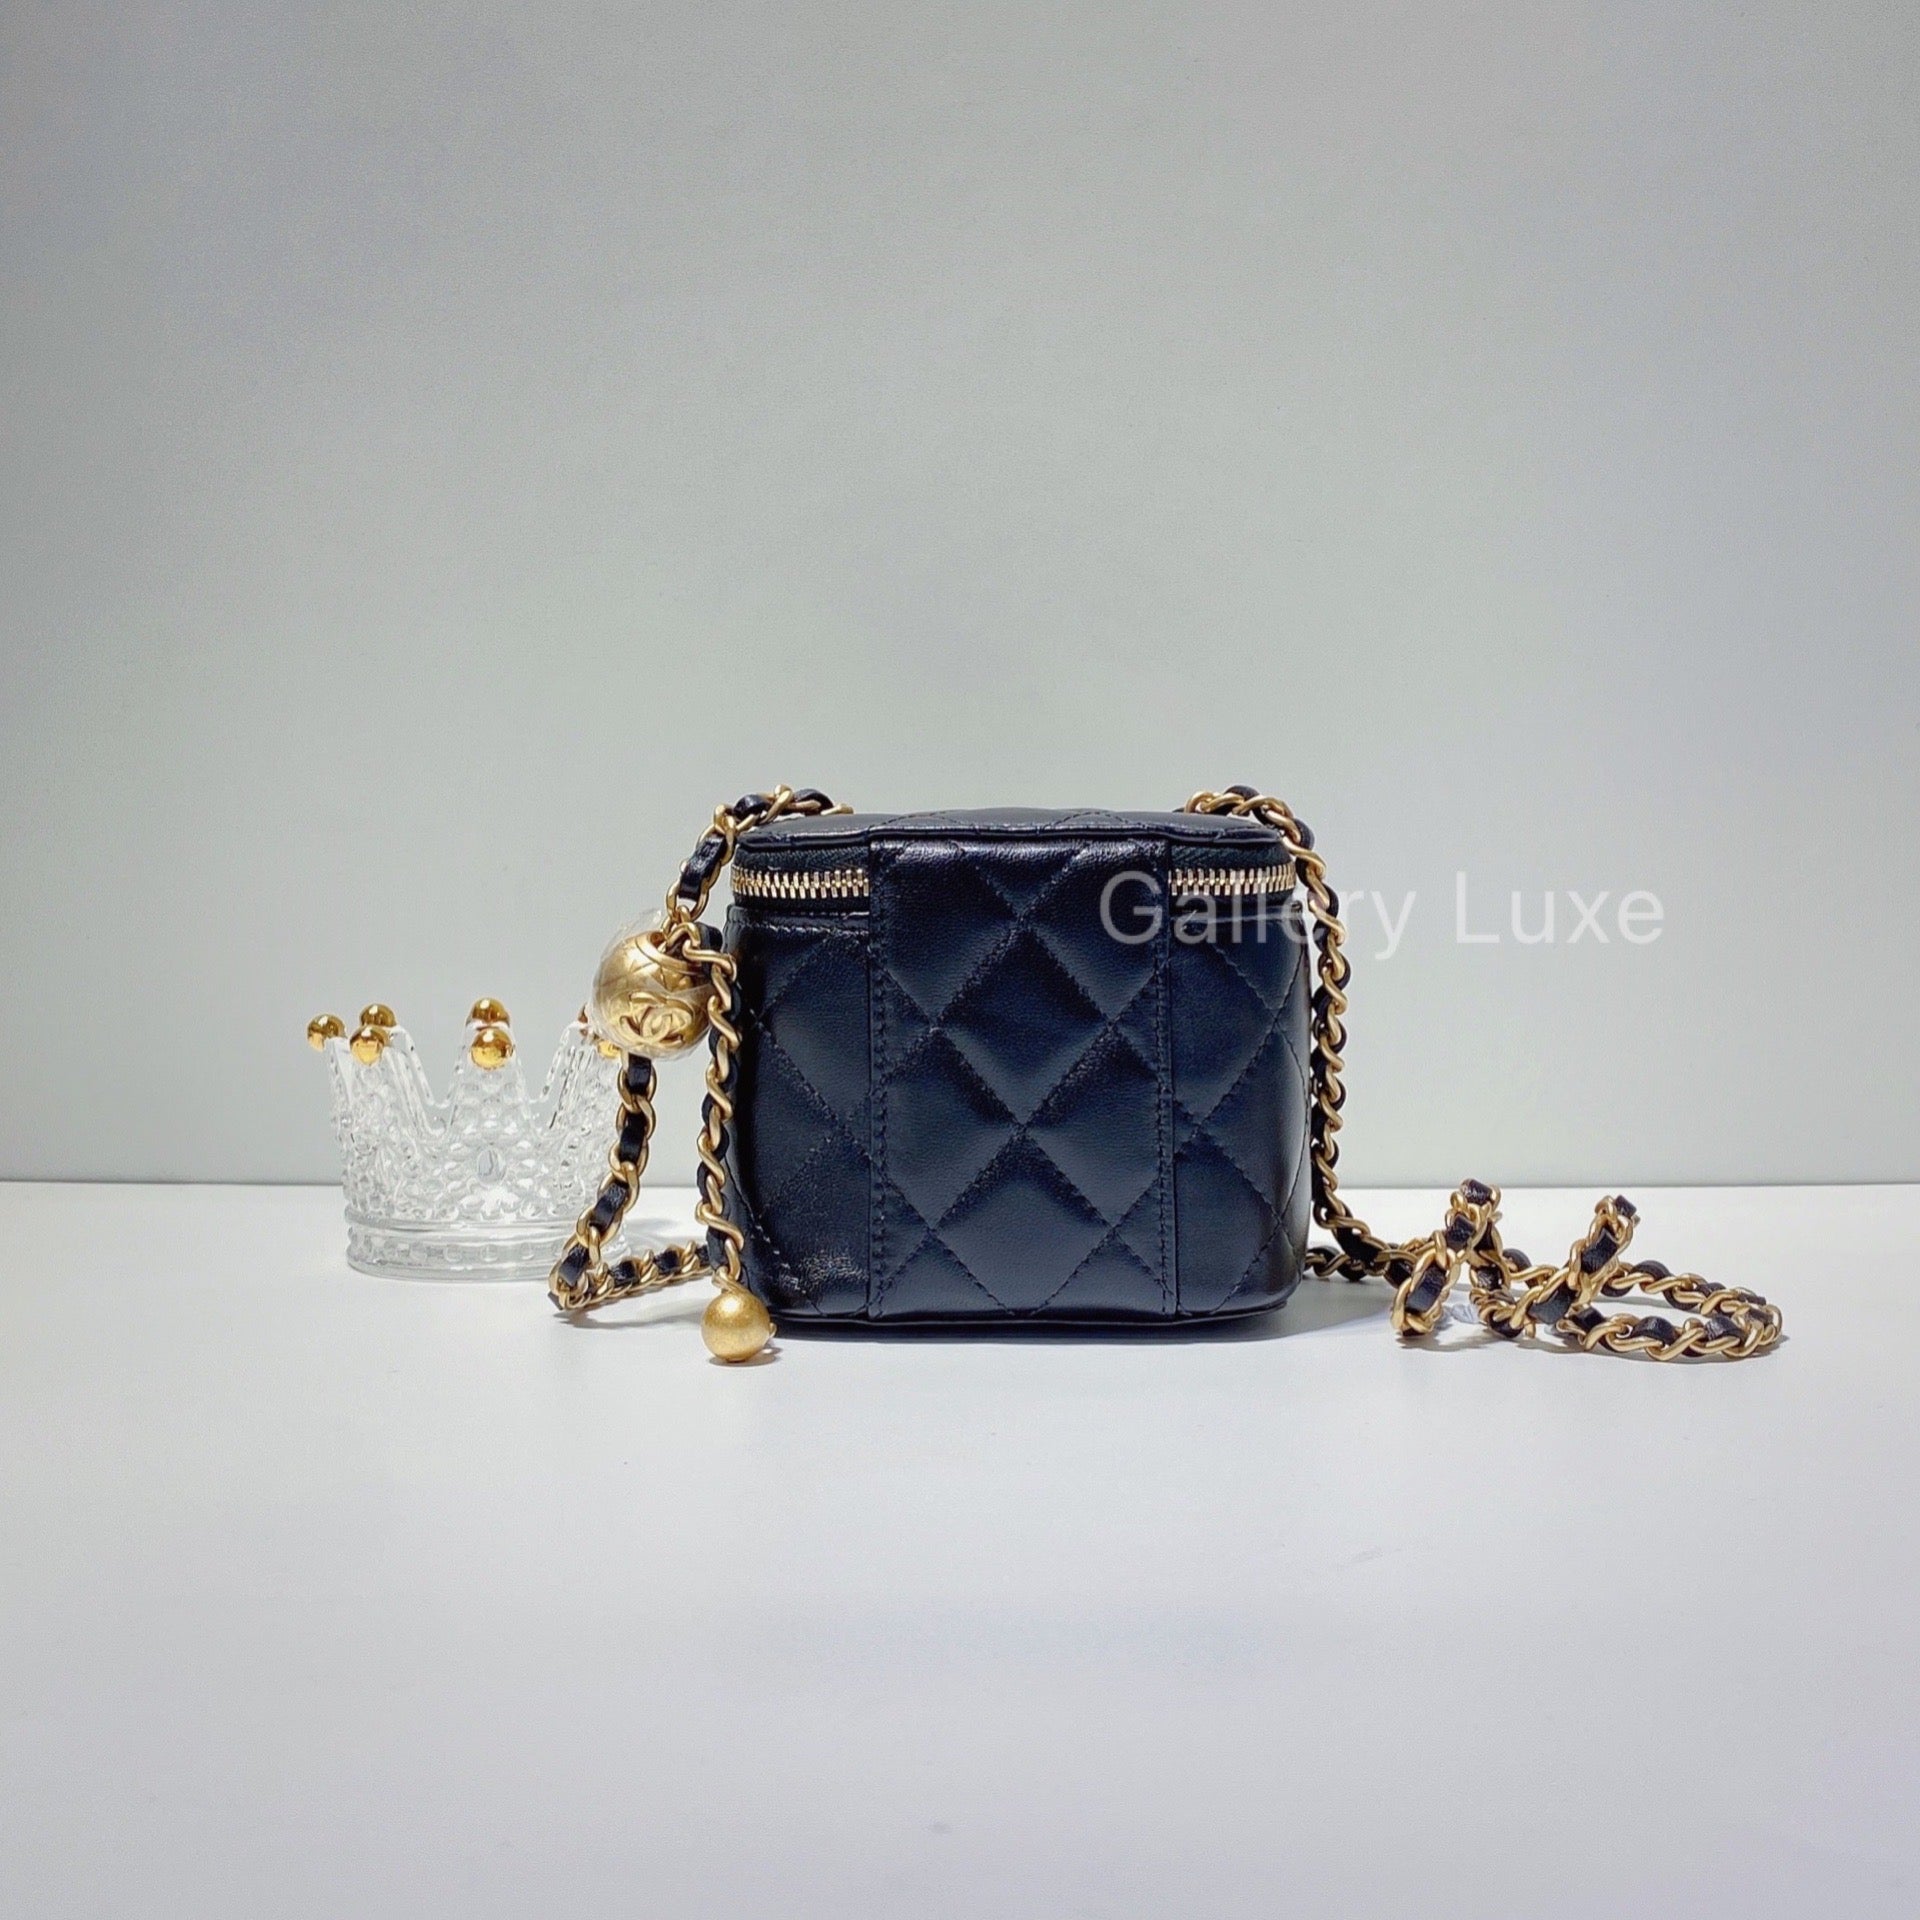 Chanel Classic Box With Chain ความหรหราทมาใน Size มน  KATE STYLE